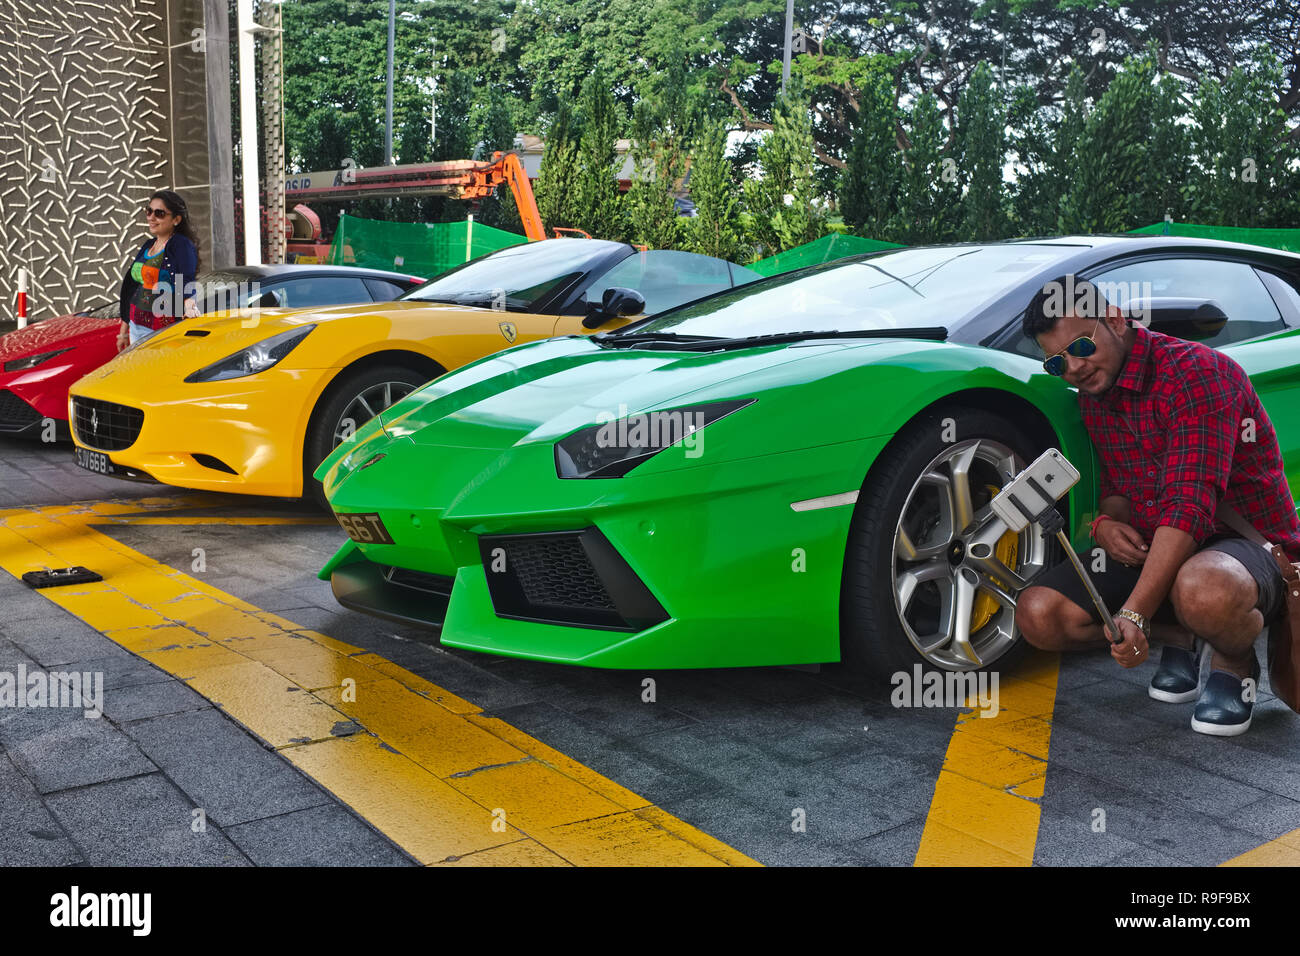 An Indian tourist takes a selfie in front of a Lamborghini Aventador and other luxury cars parked at Marina Bay Sands Hotel, Marina Bay, Singapore Stock Photo